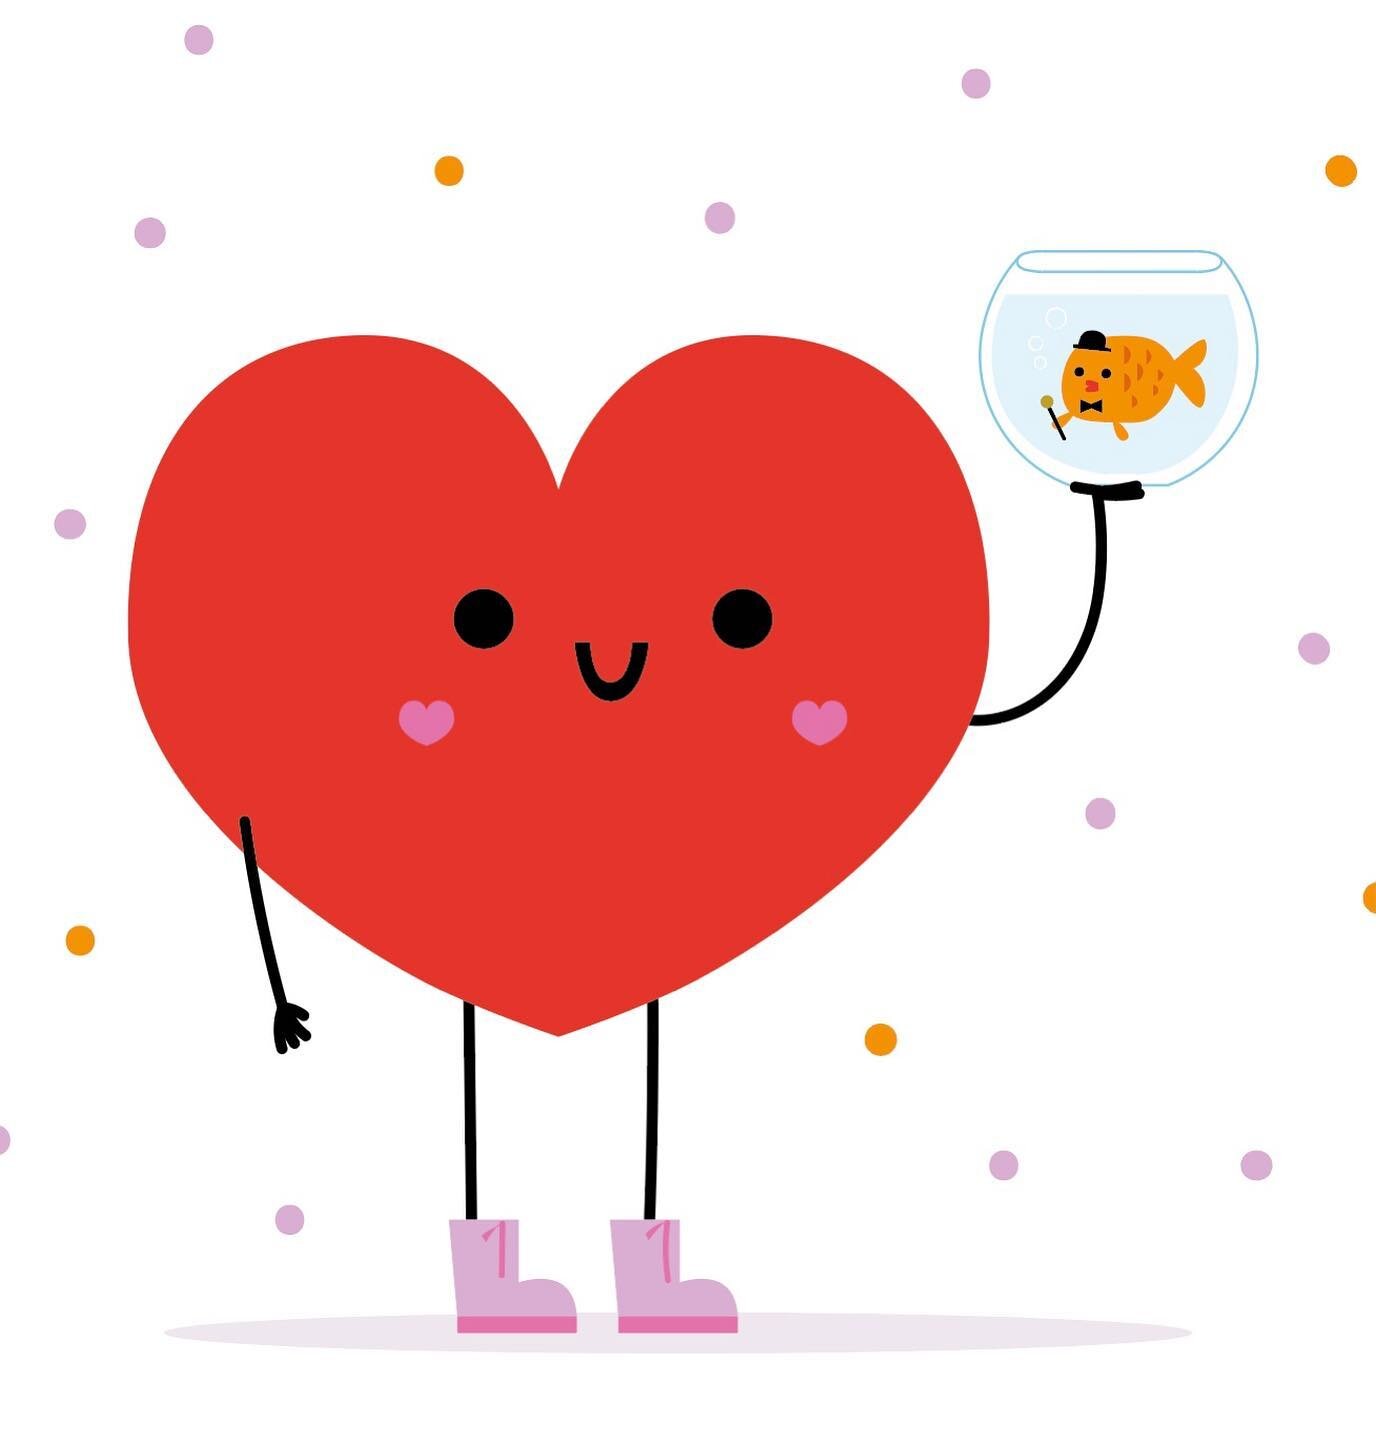 Happy Heart Day! This guy likes to show his love by gifting well dressed goldfish. ❤️🧡💛💚💙💜 #happyvalentinesday #heart #kidsillustrator #childrensbookillustration #characterillustration